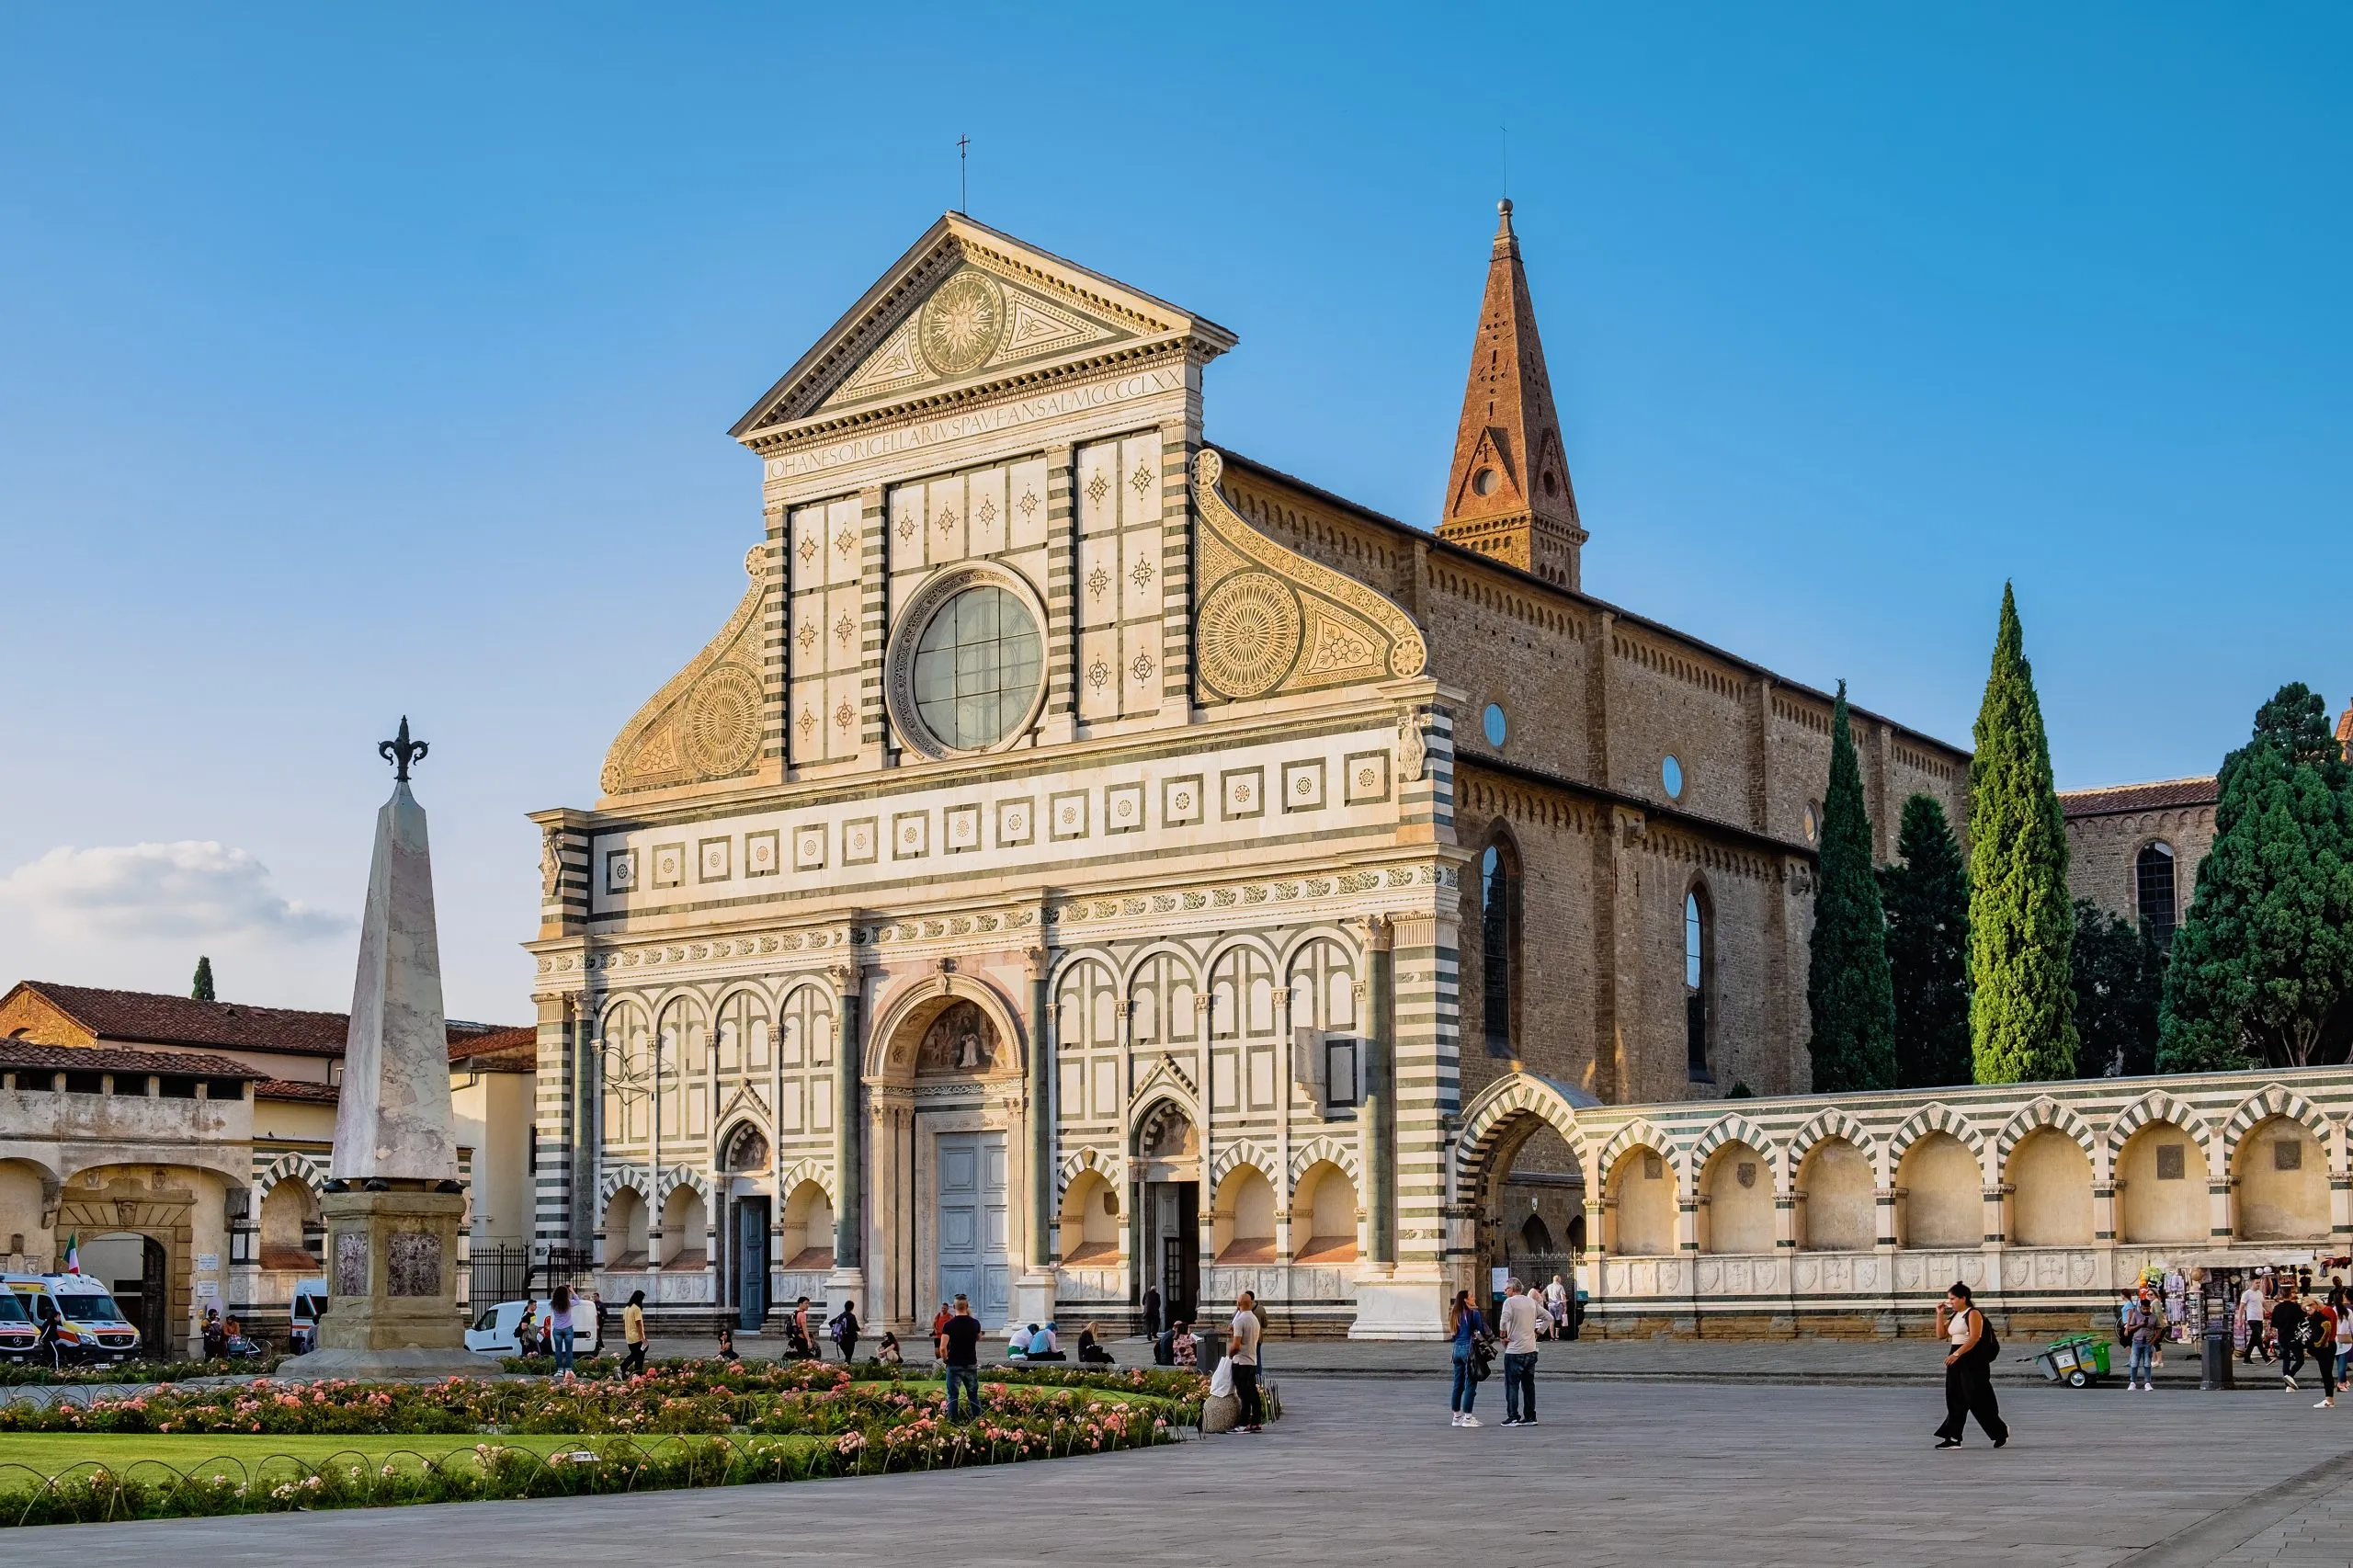 Florence, Italy - October 18, 2022: Basilica of Santa Maria Novella, one of the most important Gothic churches in Tuscany.